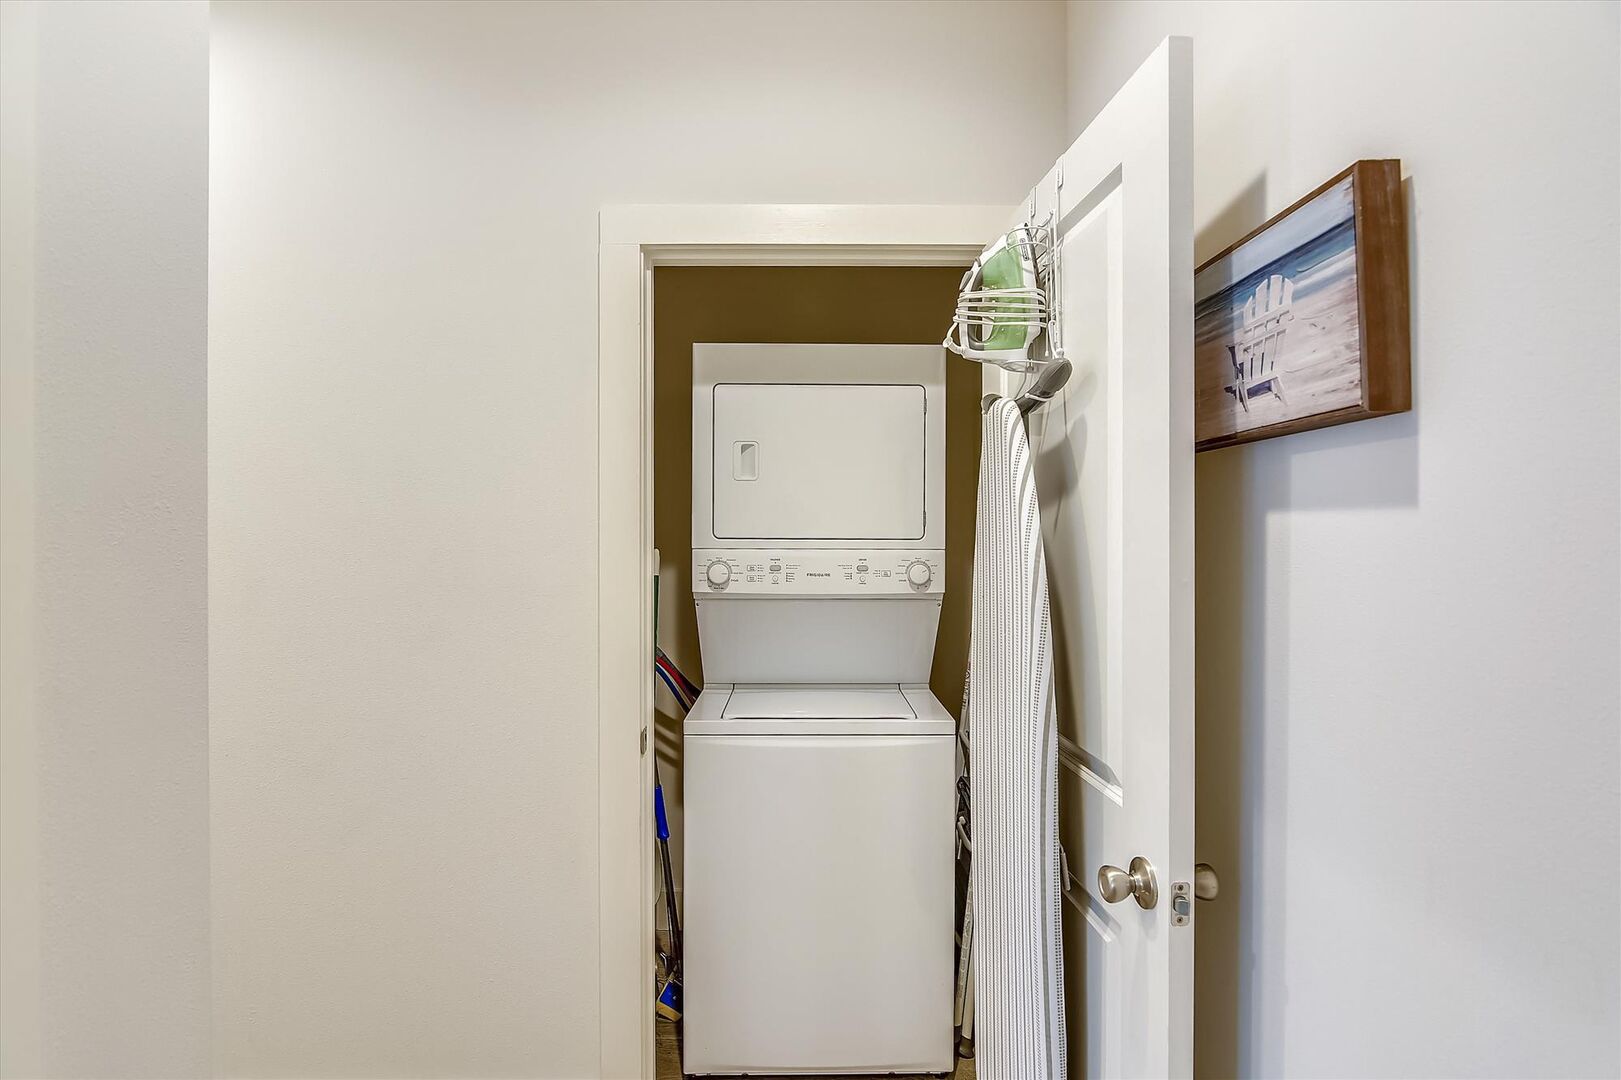 Stackable Washer and Dryer